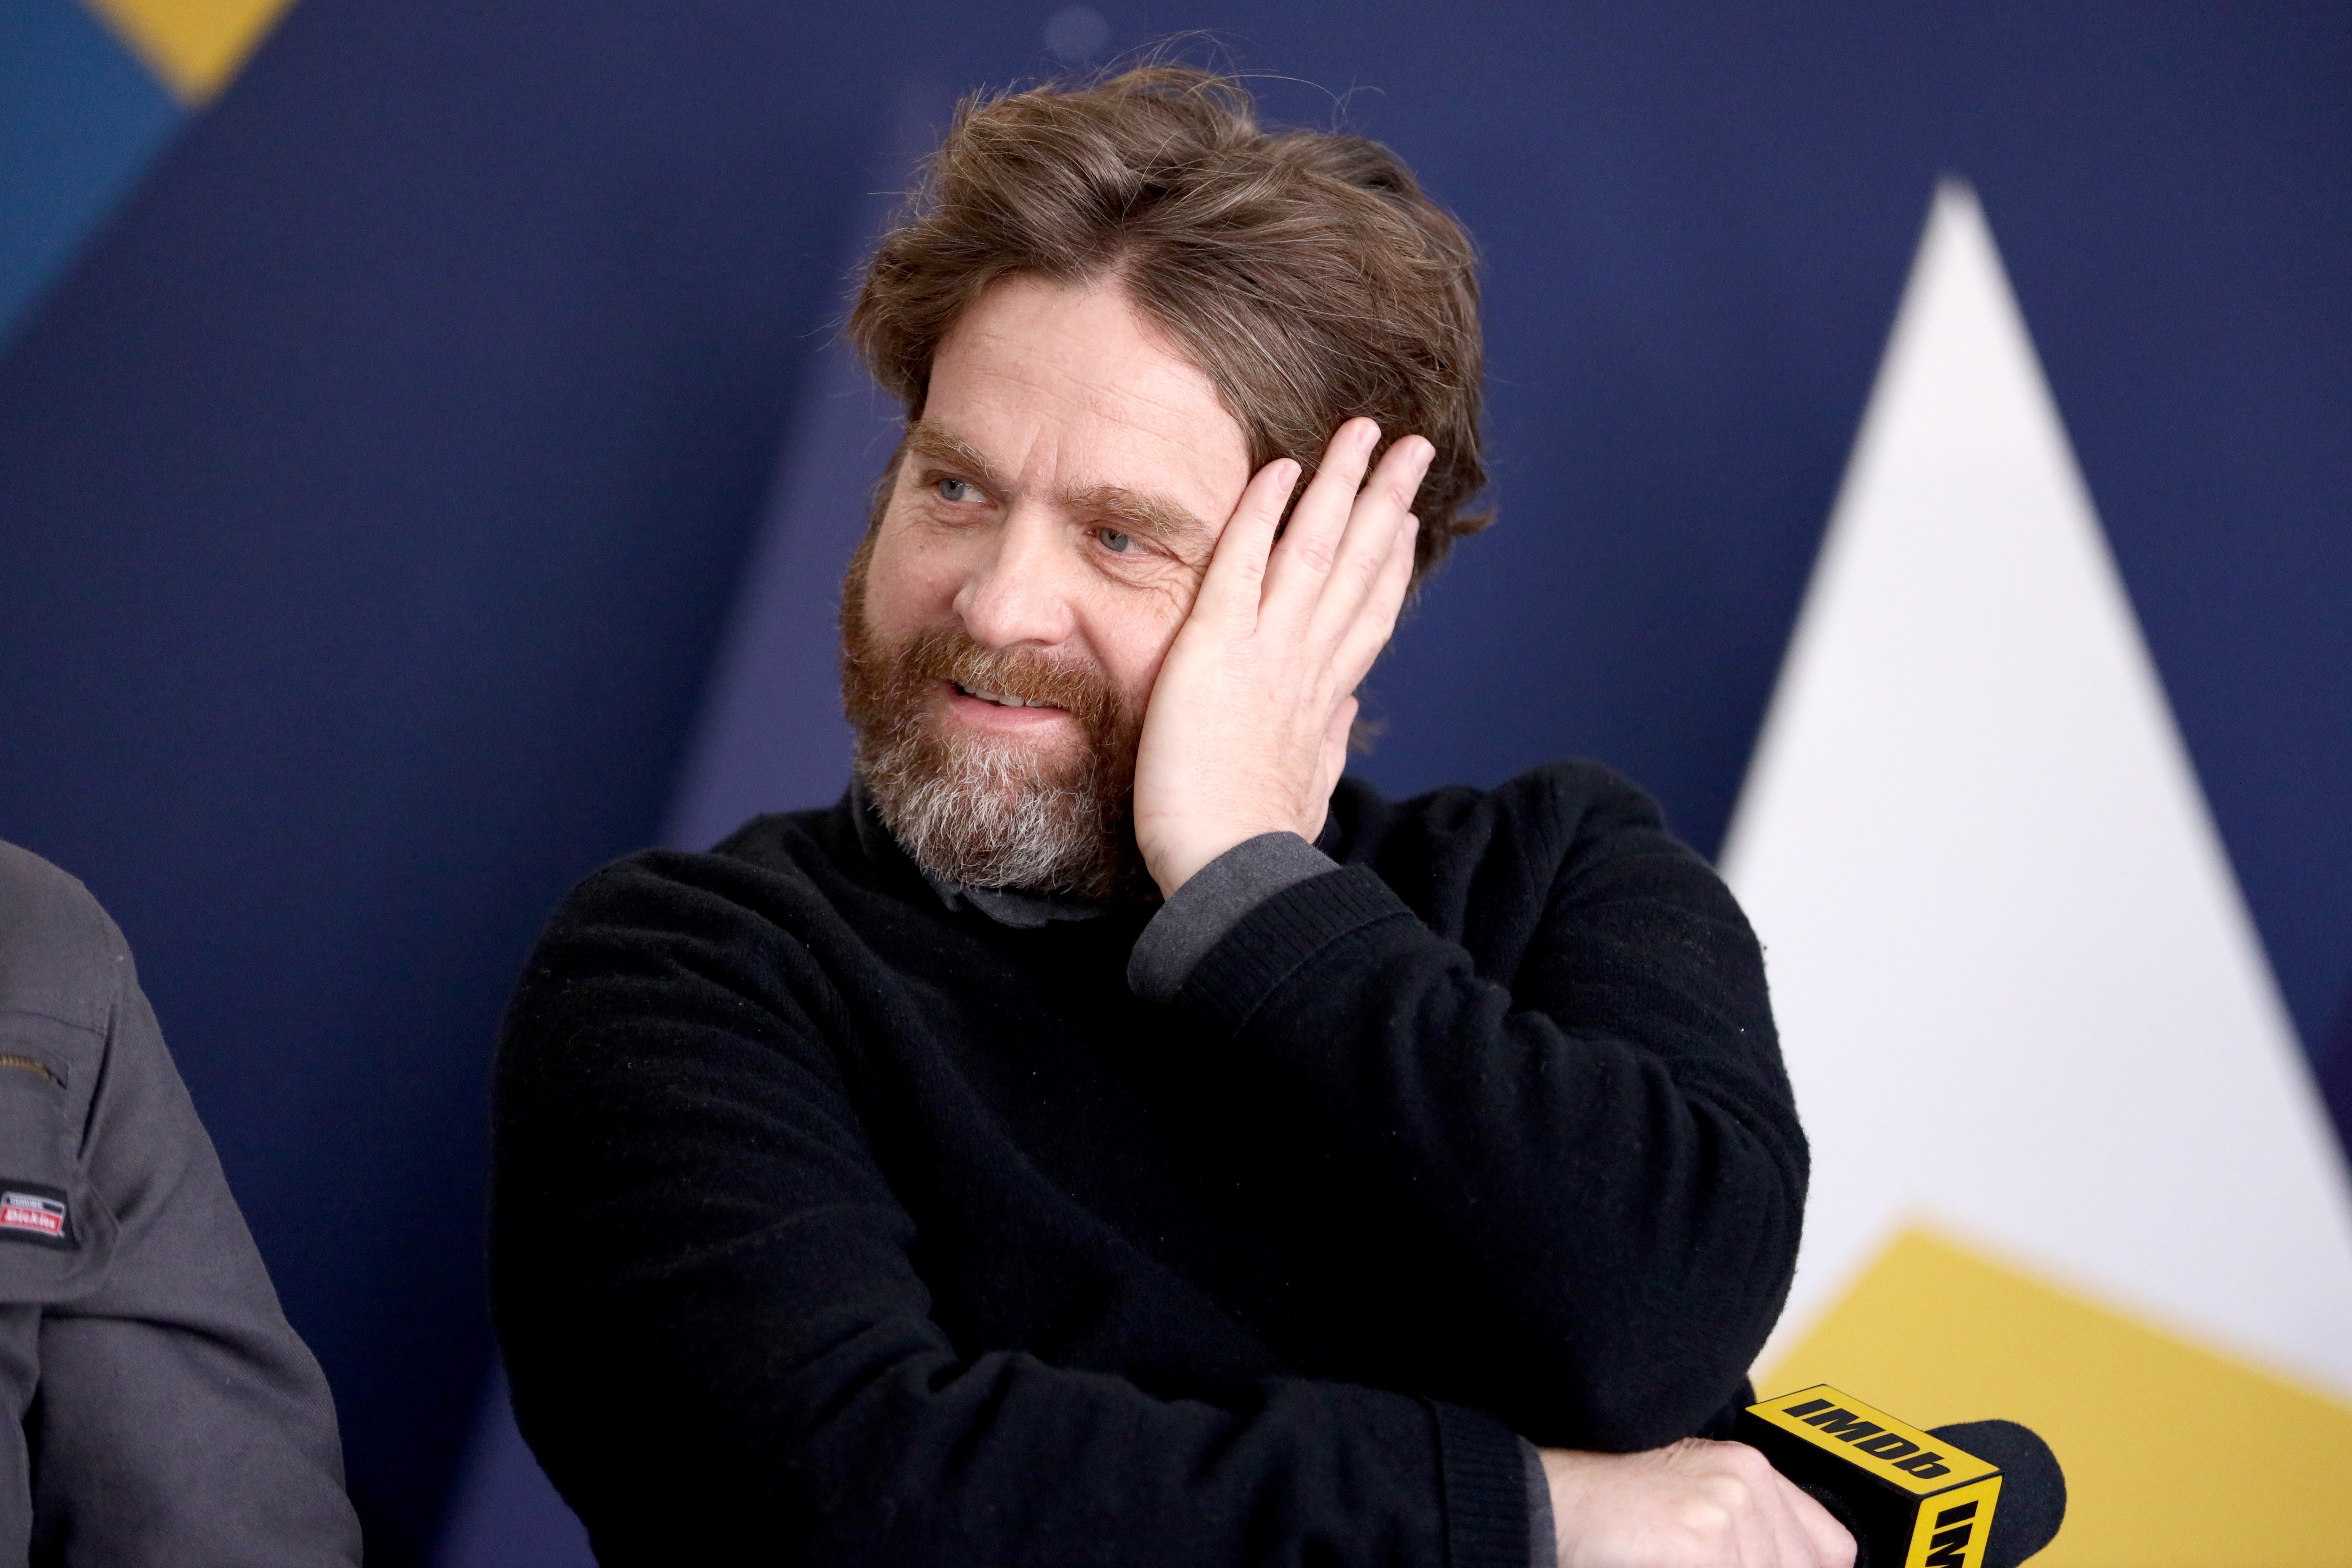 Zach Galifianakis of 'The Sunlit Night' attends The IMDb Studio at Acura Festival Village on location at The 2019 Sundance Film Festival - Day 2 on January 26, 2019 in Park City, Utah. | Source: Getty Images